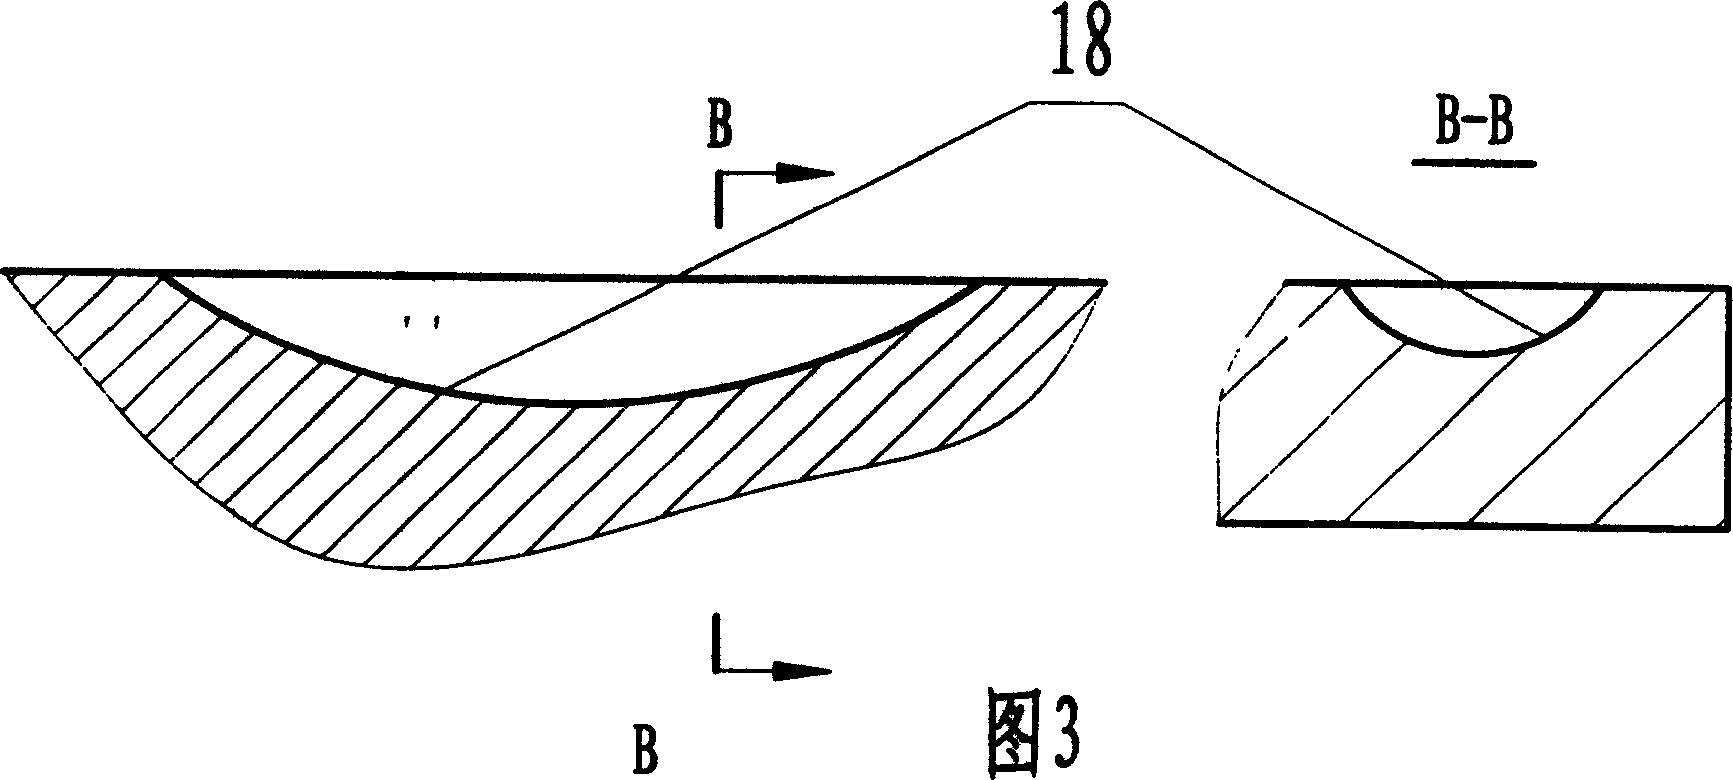 Brake tongs with brake for stationed vehicle